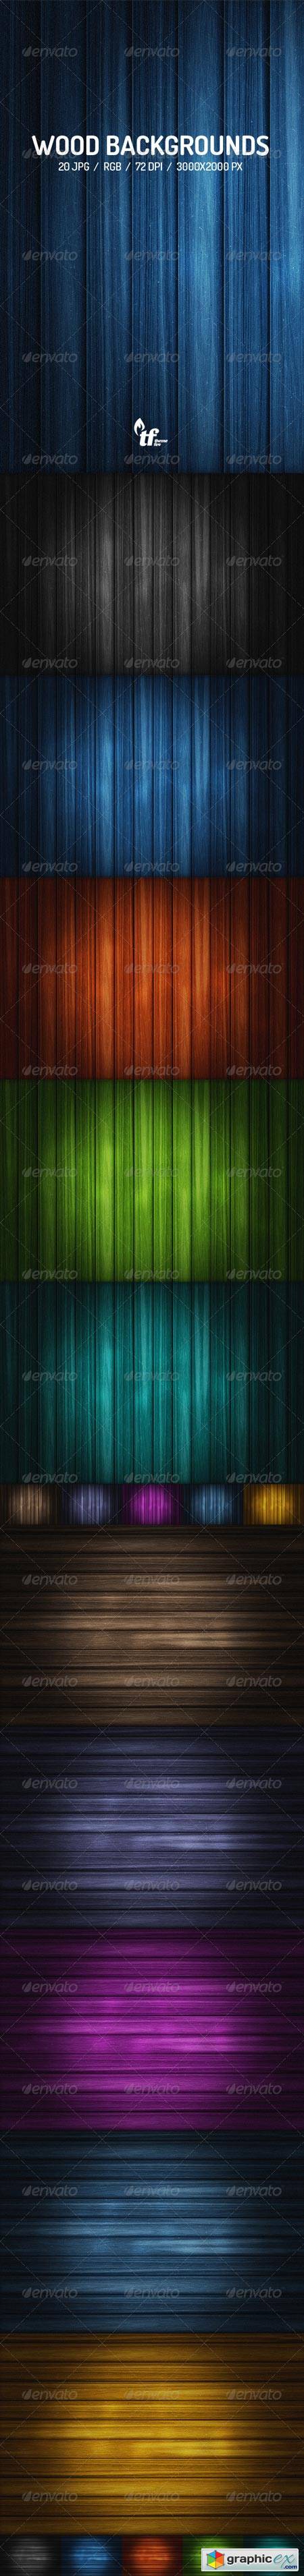 20 Wood Backgrounds 7790683